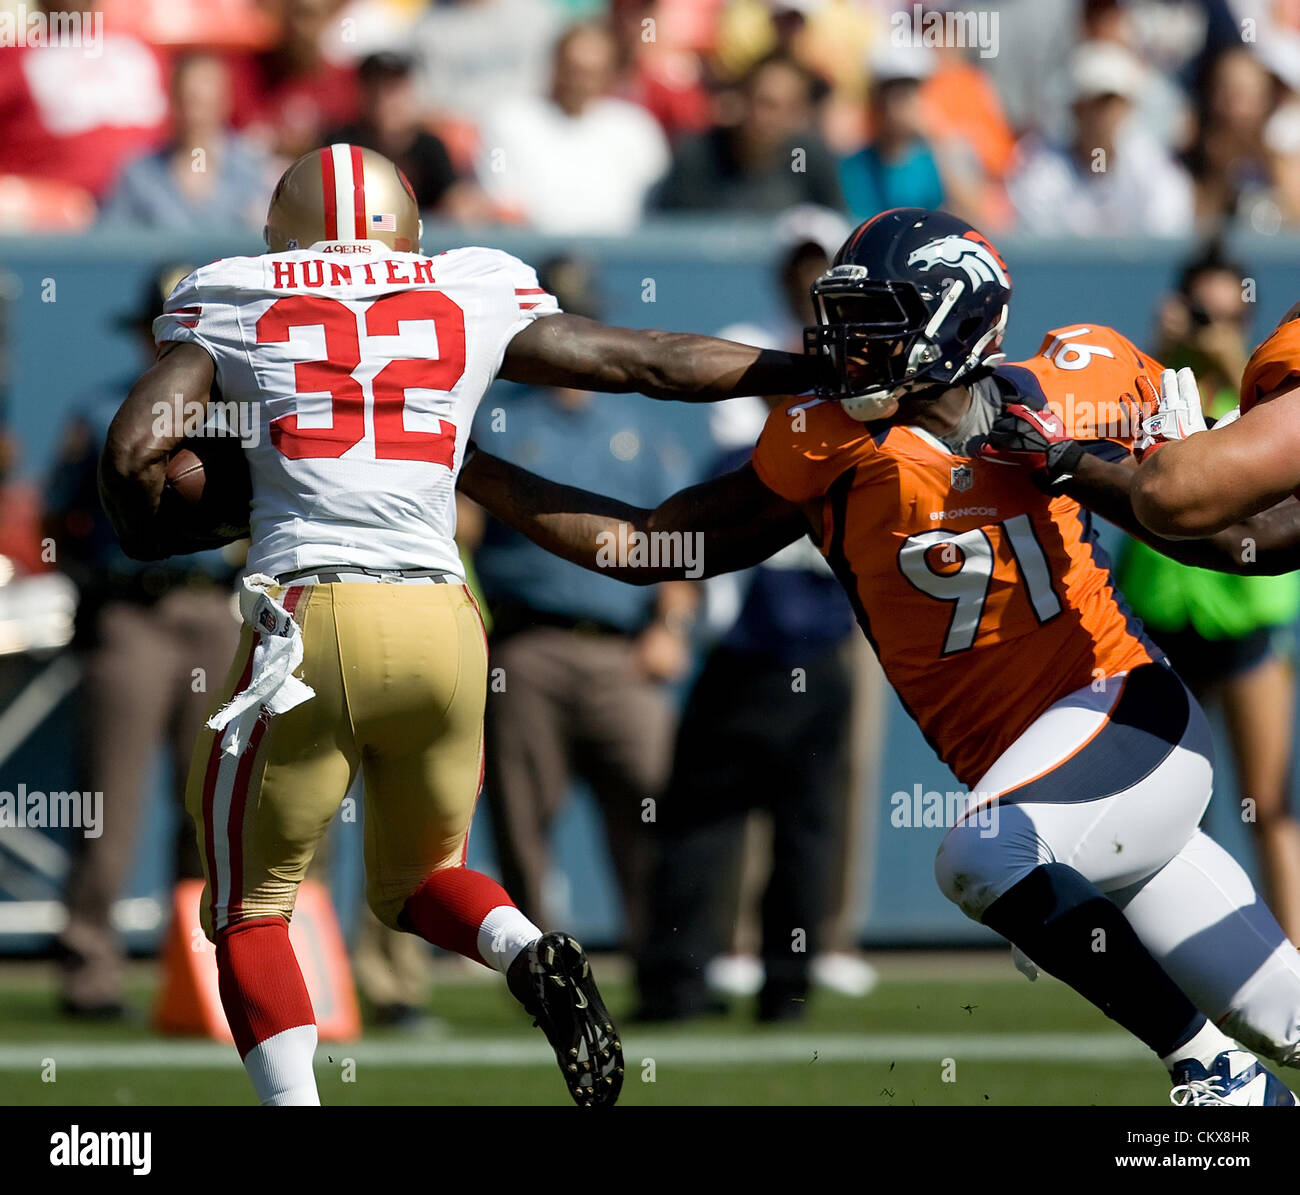 Aug. 26, 2012 - Denver, CO, USA - 49ers RB KENDALL HUNTER, left, avoids a tackle by Broncos DE ROBERT AYERS, right, during the 1st. half at Sports Authority Field at Mile High Sunday afternoon. The Broncos lose to the the 49ers 29-24. (Credit Image: © Hector Acevedo/ZUMAPRESS.com) Stock Photo